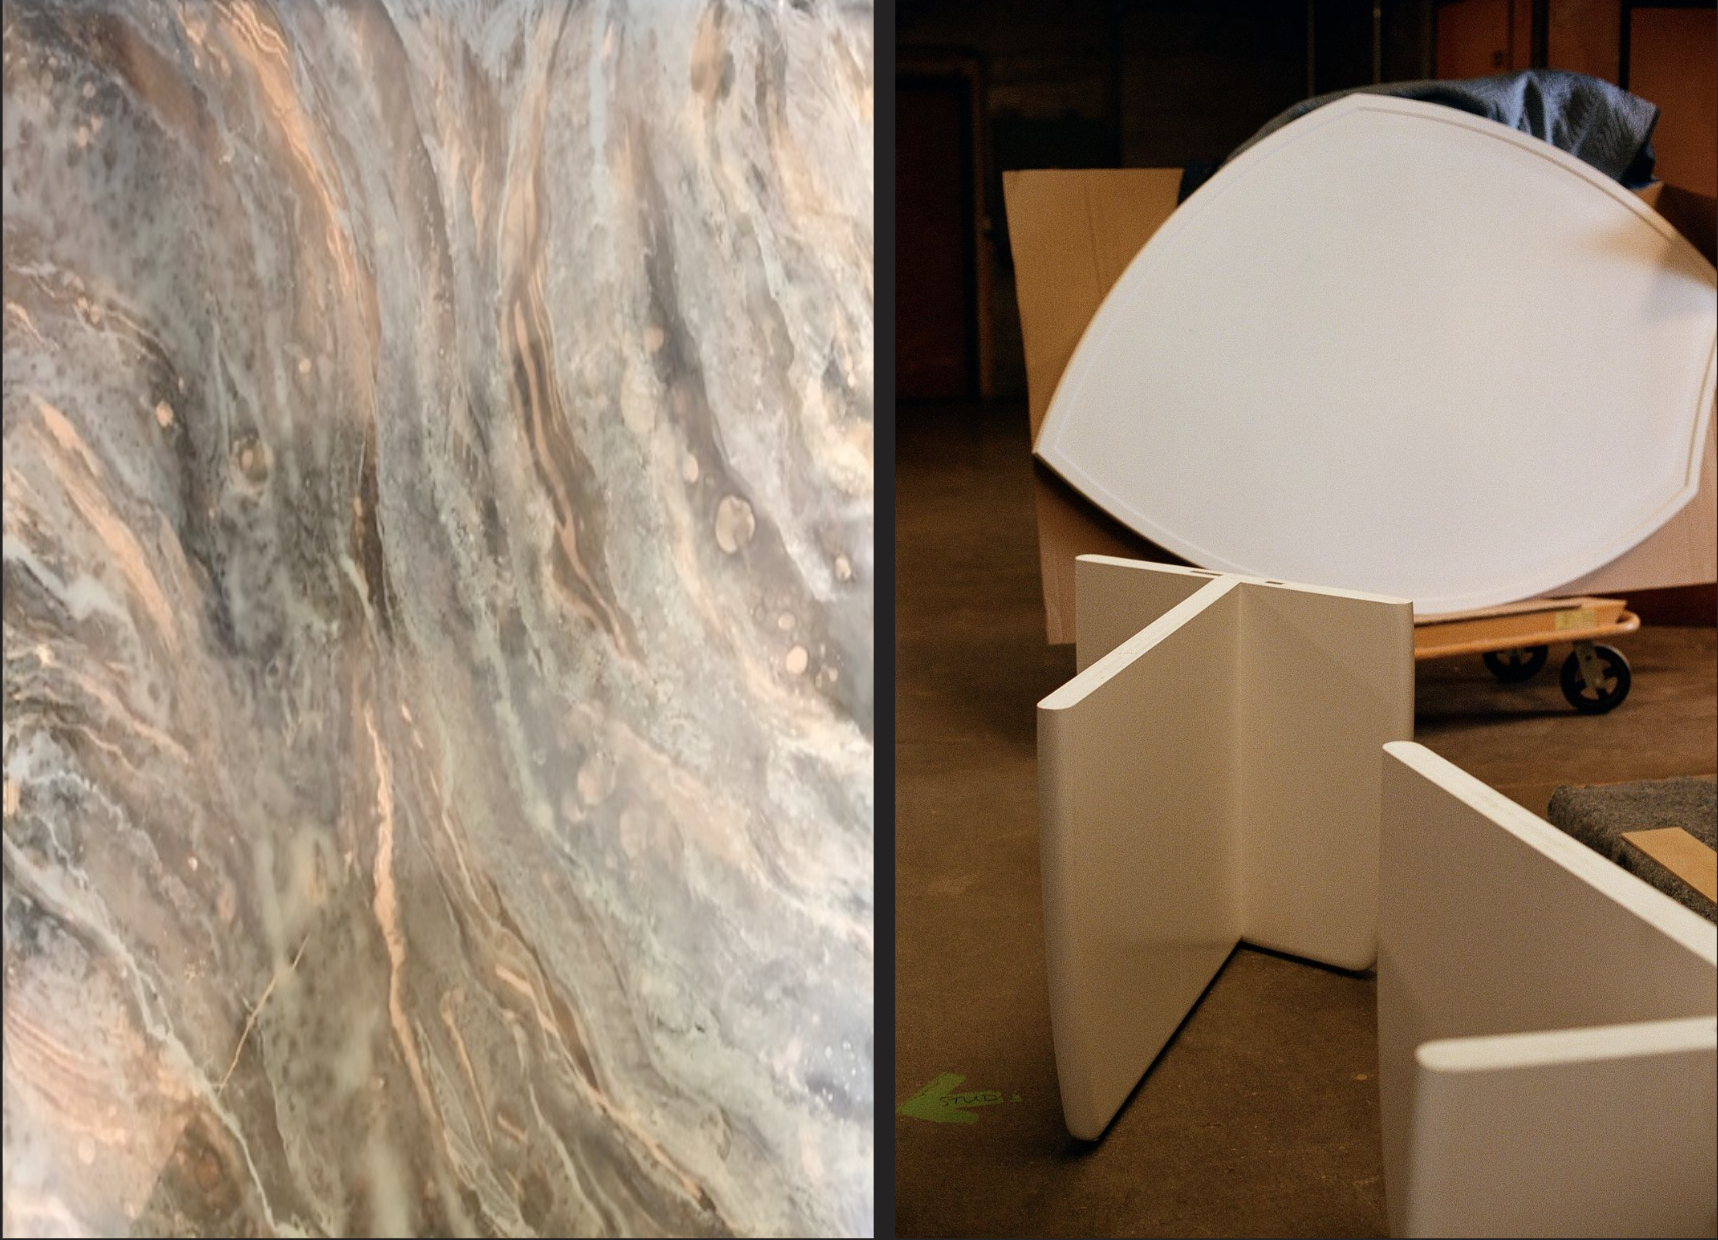 Left: Detail of the custom verre églomisé treatment by Victoria Weiss. Right: Constructed parts of the lacquered wood table base by Julian Giuntoli Custom Furniture.